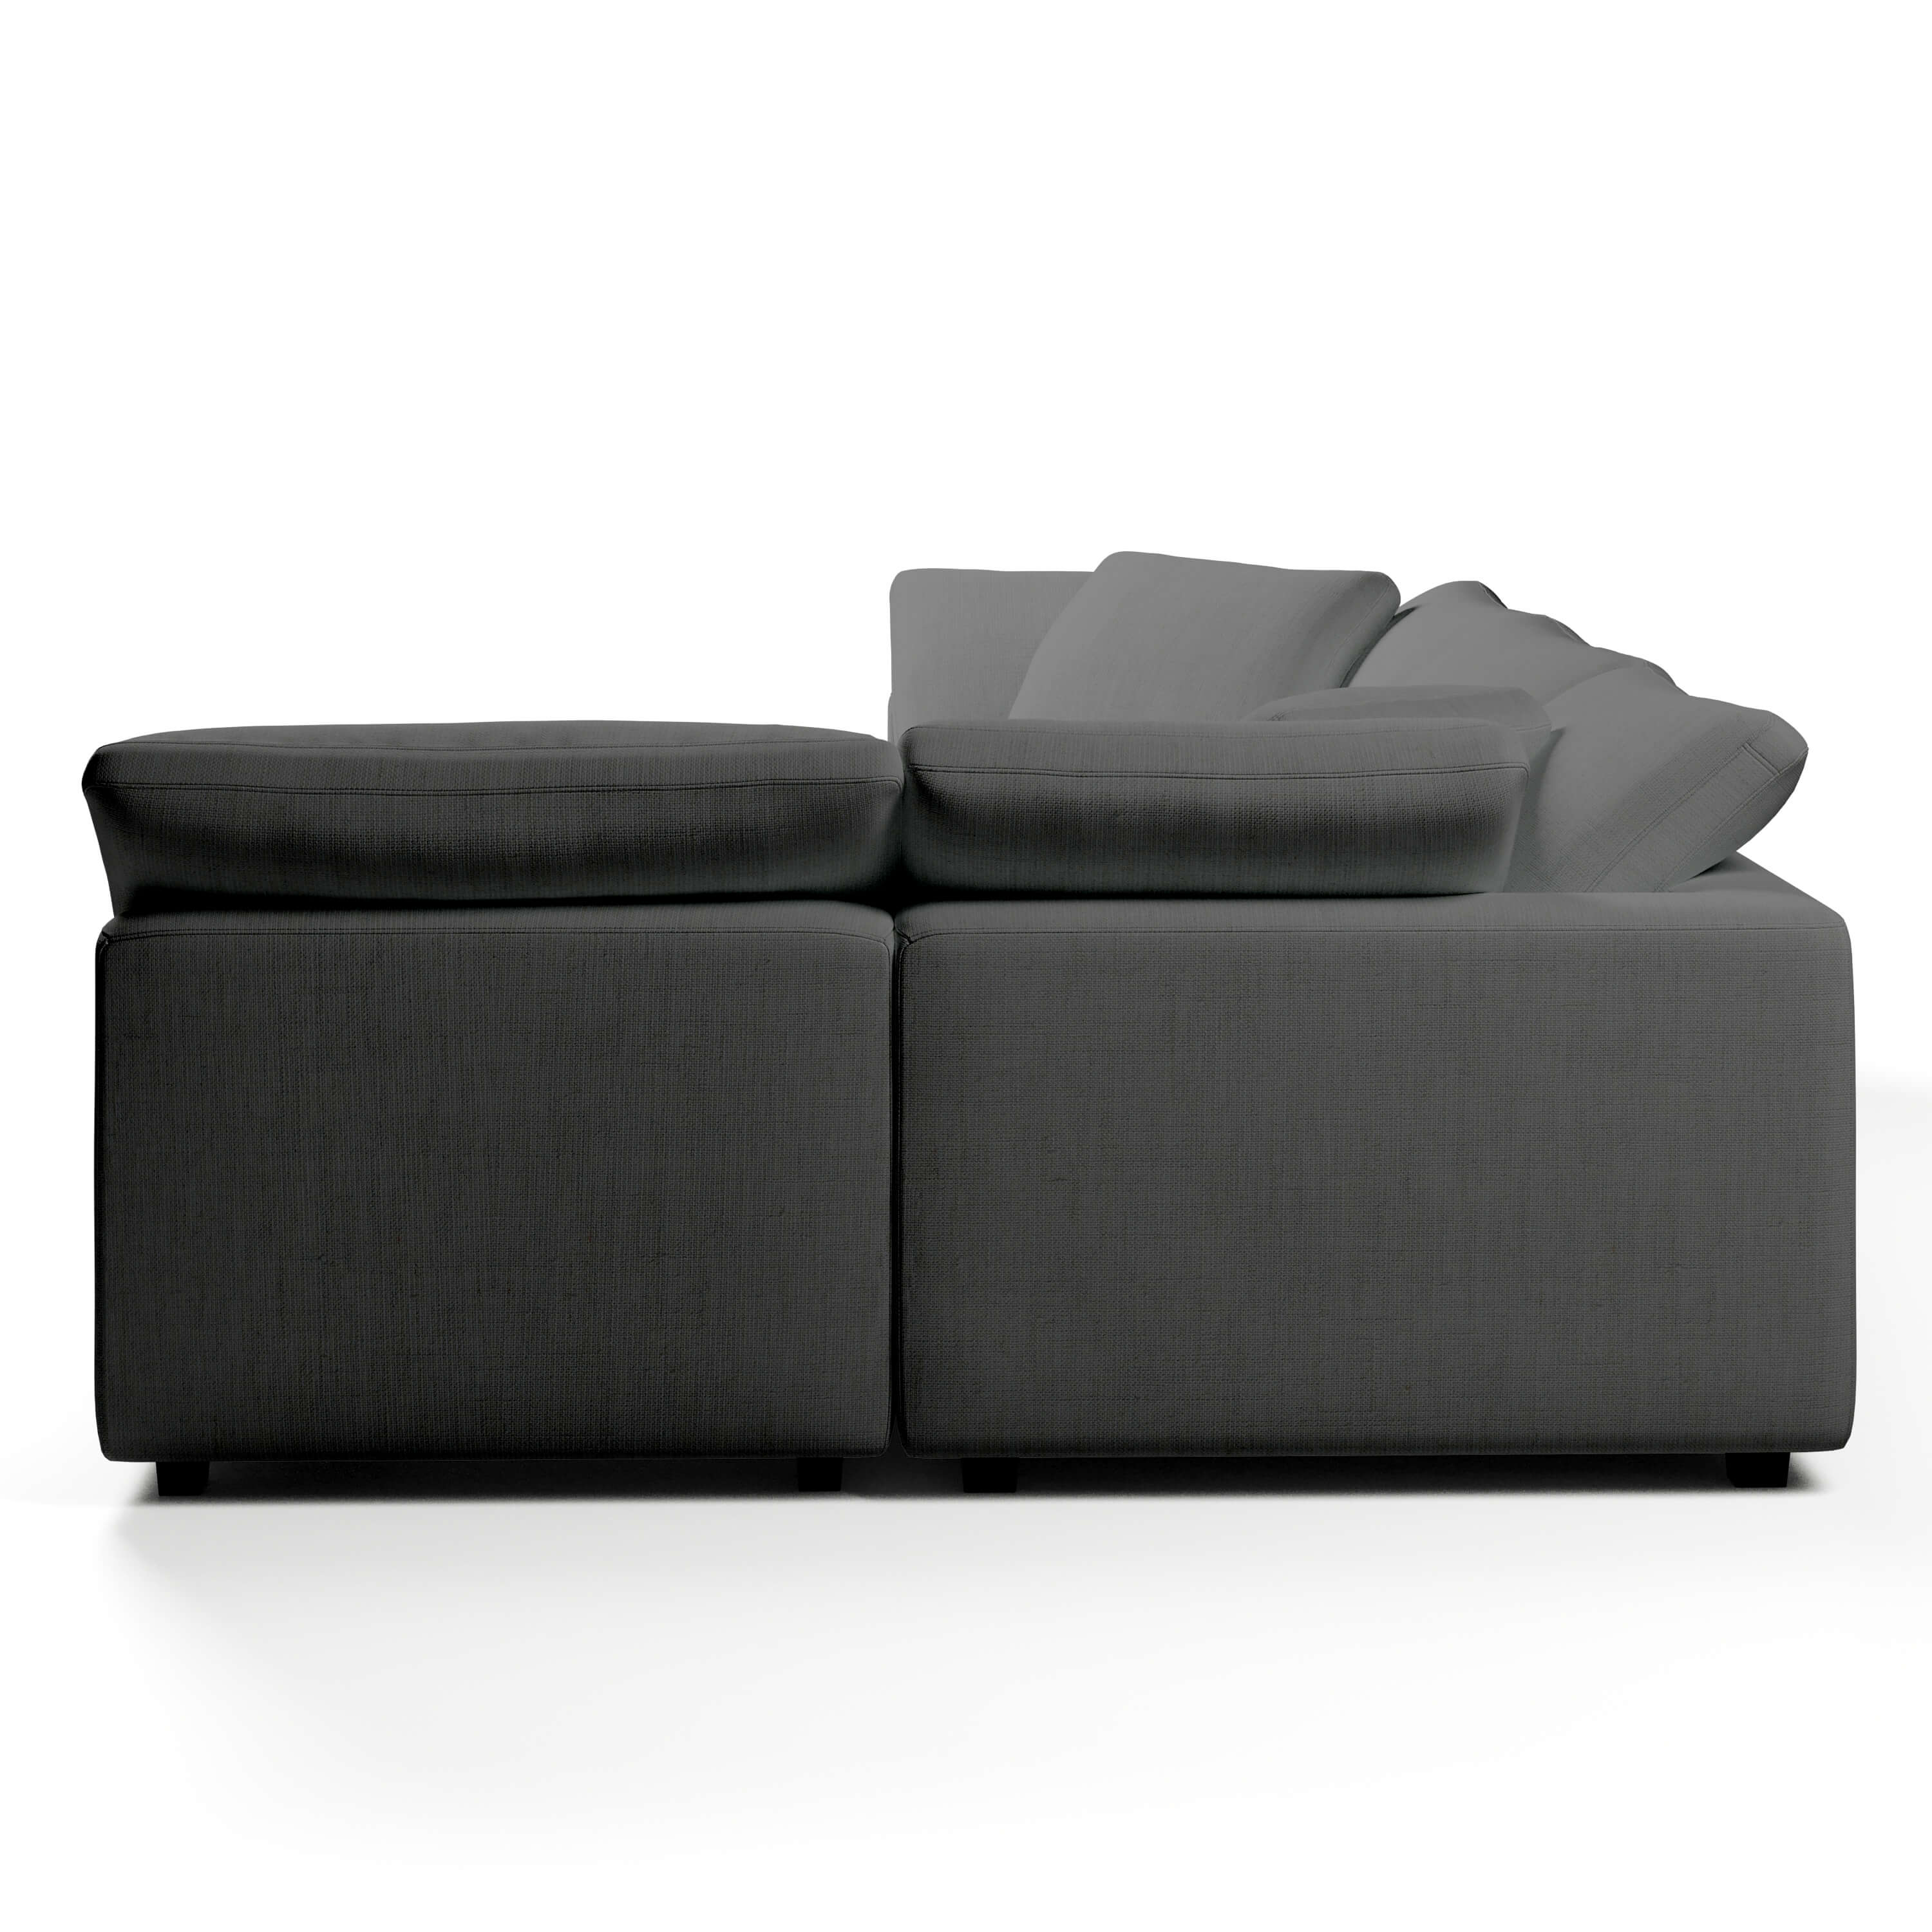 Comfy Modular Sofa - 4-Seater Chaise Sectional - Left Hand Facing